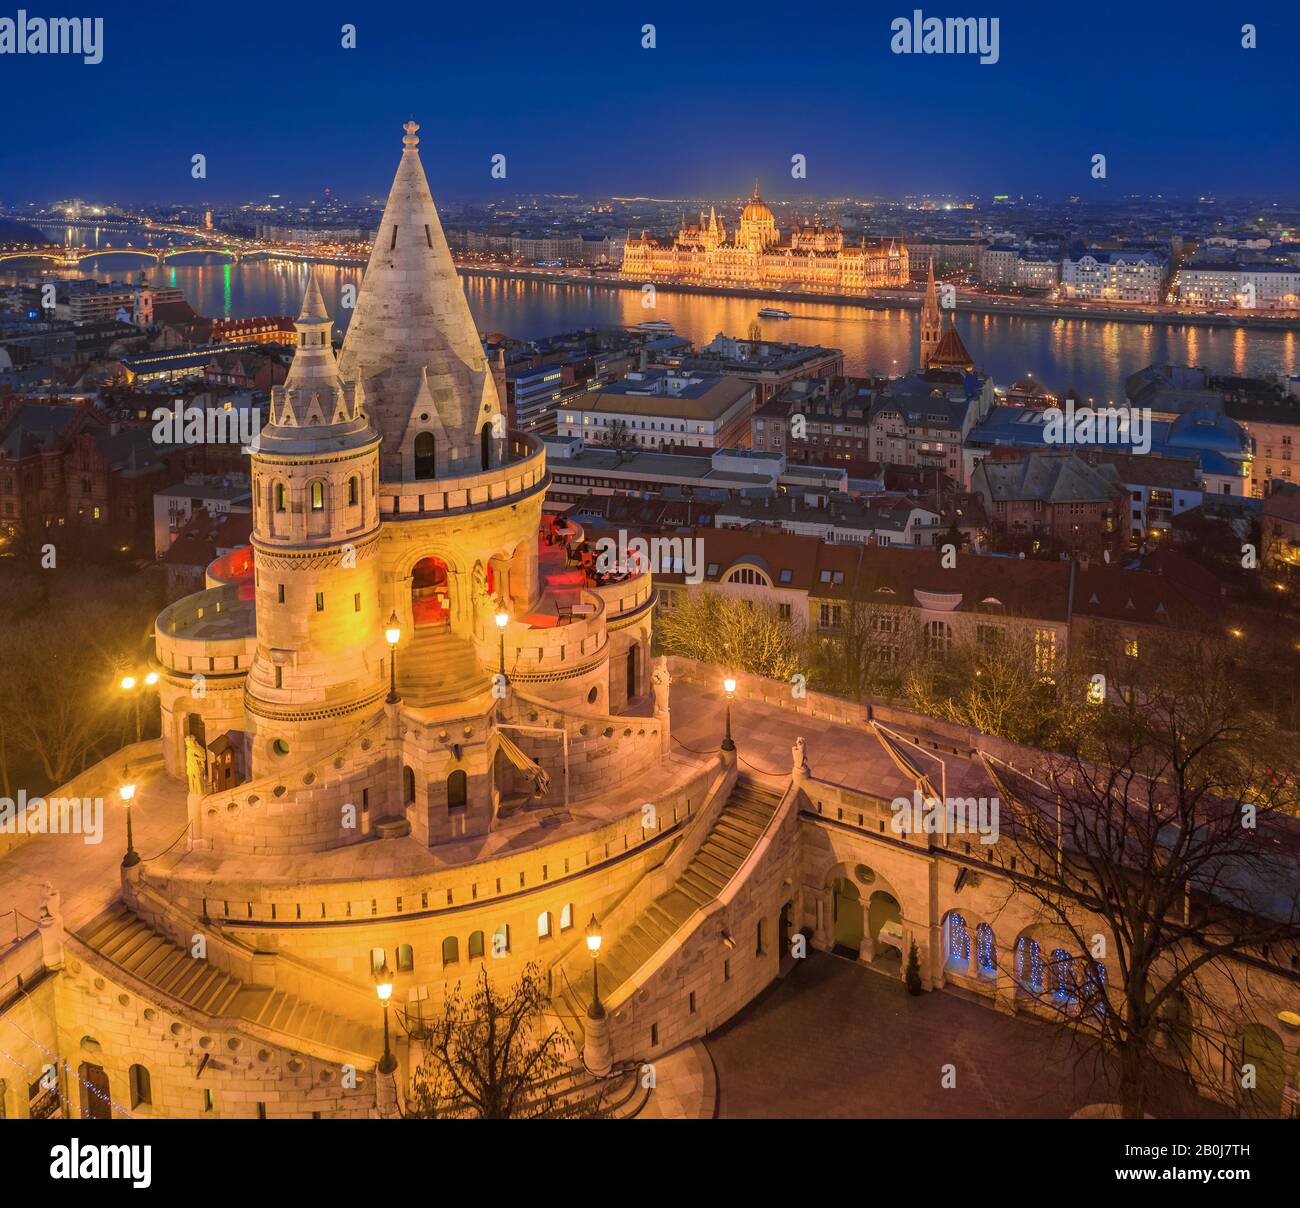 Budapest, Hungary - Aerial view of the main tower of Fisherman's Bastion (Halaszbastya) with illuminated Parliament of Hungary at blue hour on a winte Stock Photo